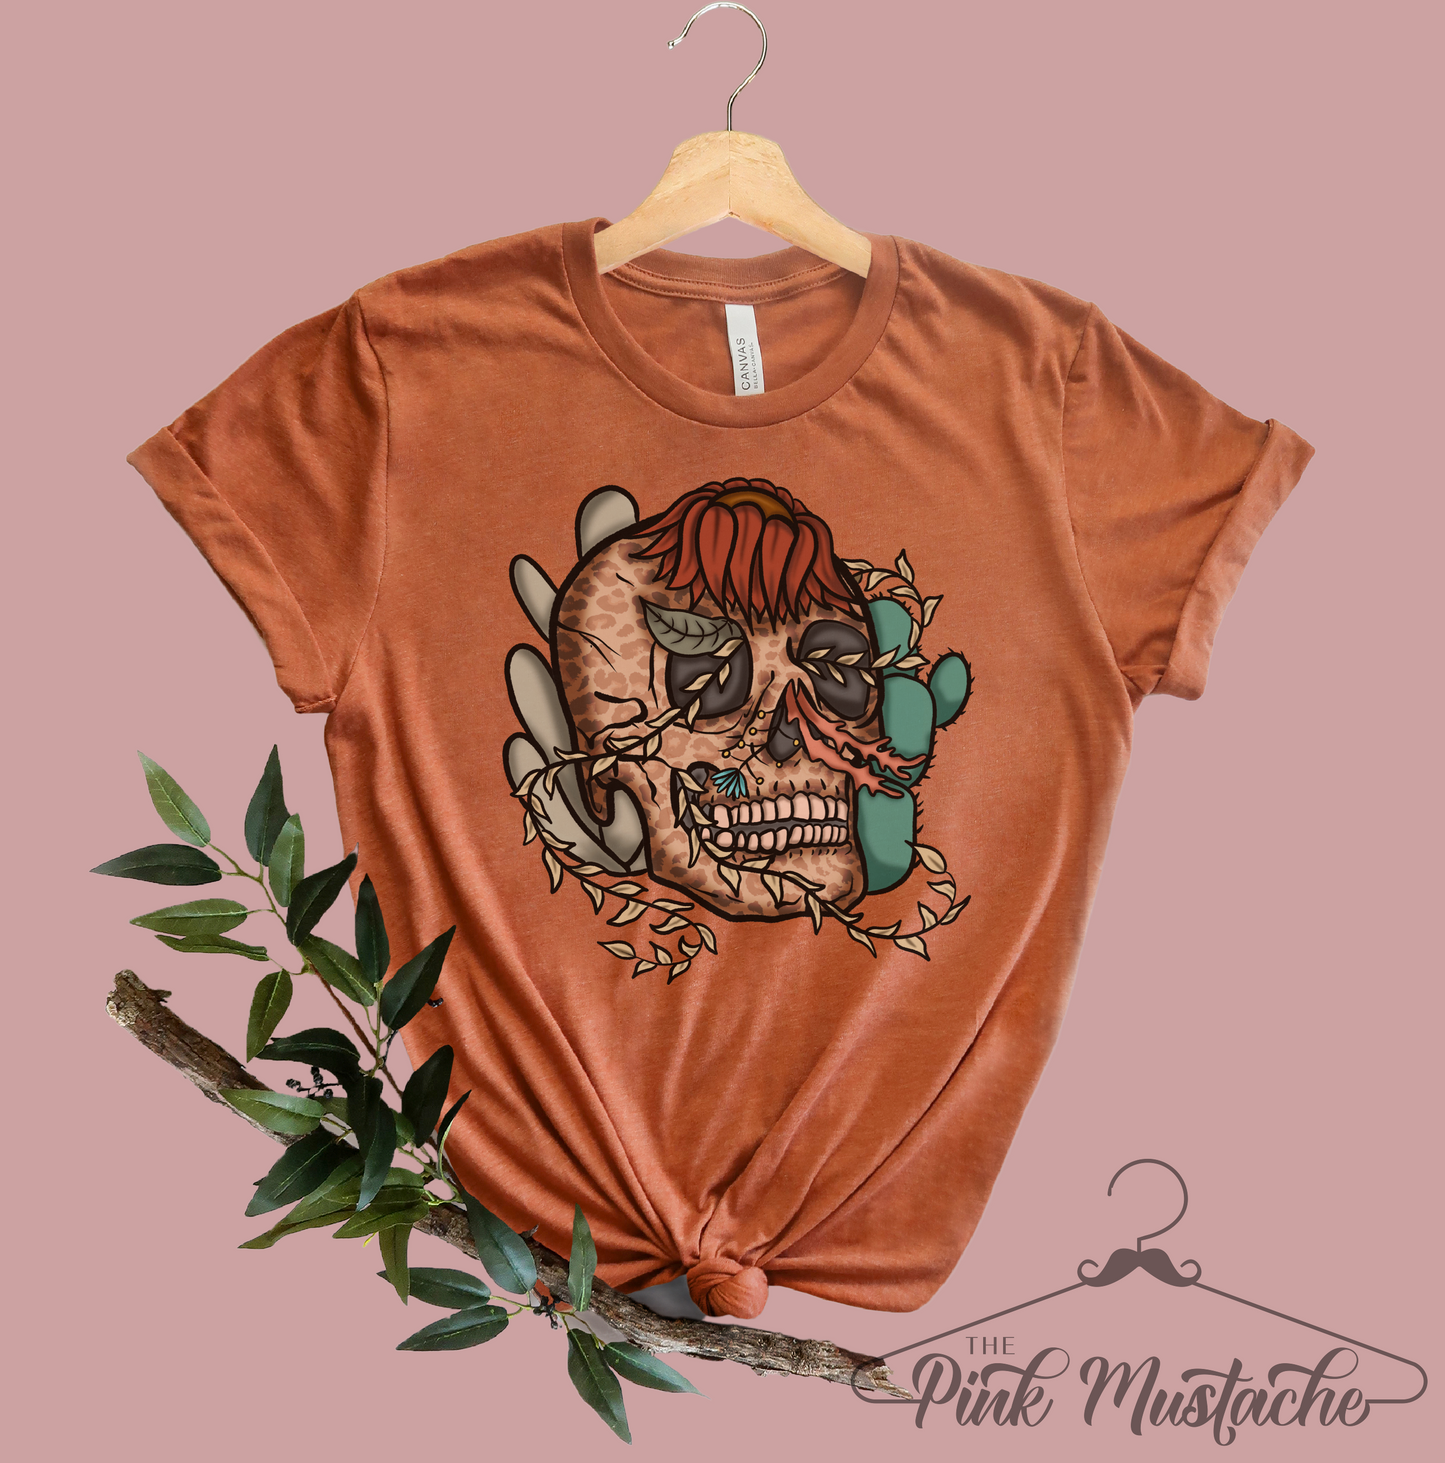 Growing Floral Cactus Skull Western Tee /Youth and Adult Sizes Available/ Country Western Unisex Softstyle T-Shirt